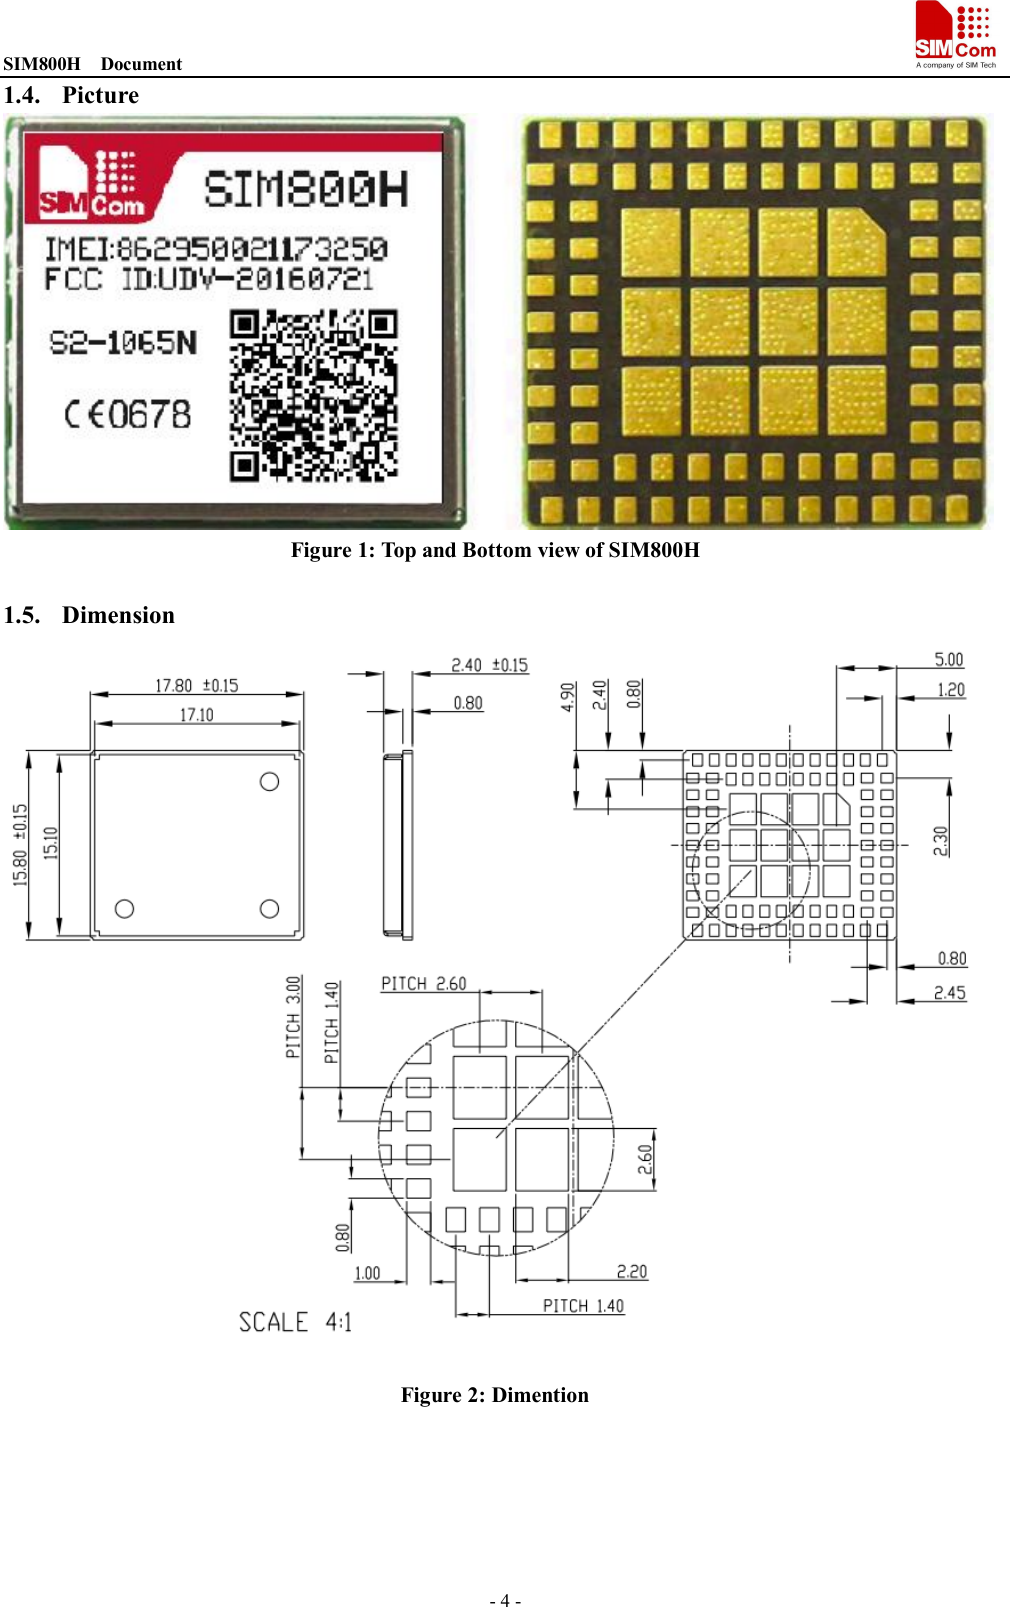 SIM800H    Document                                                                                   - 4 - 1.4. Picture  Figure 1: Top and Bottom view of SIM800H  1.5. Dimension  Figure 2: Dimention     